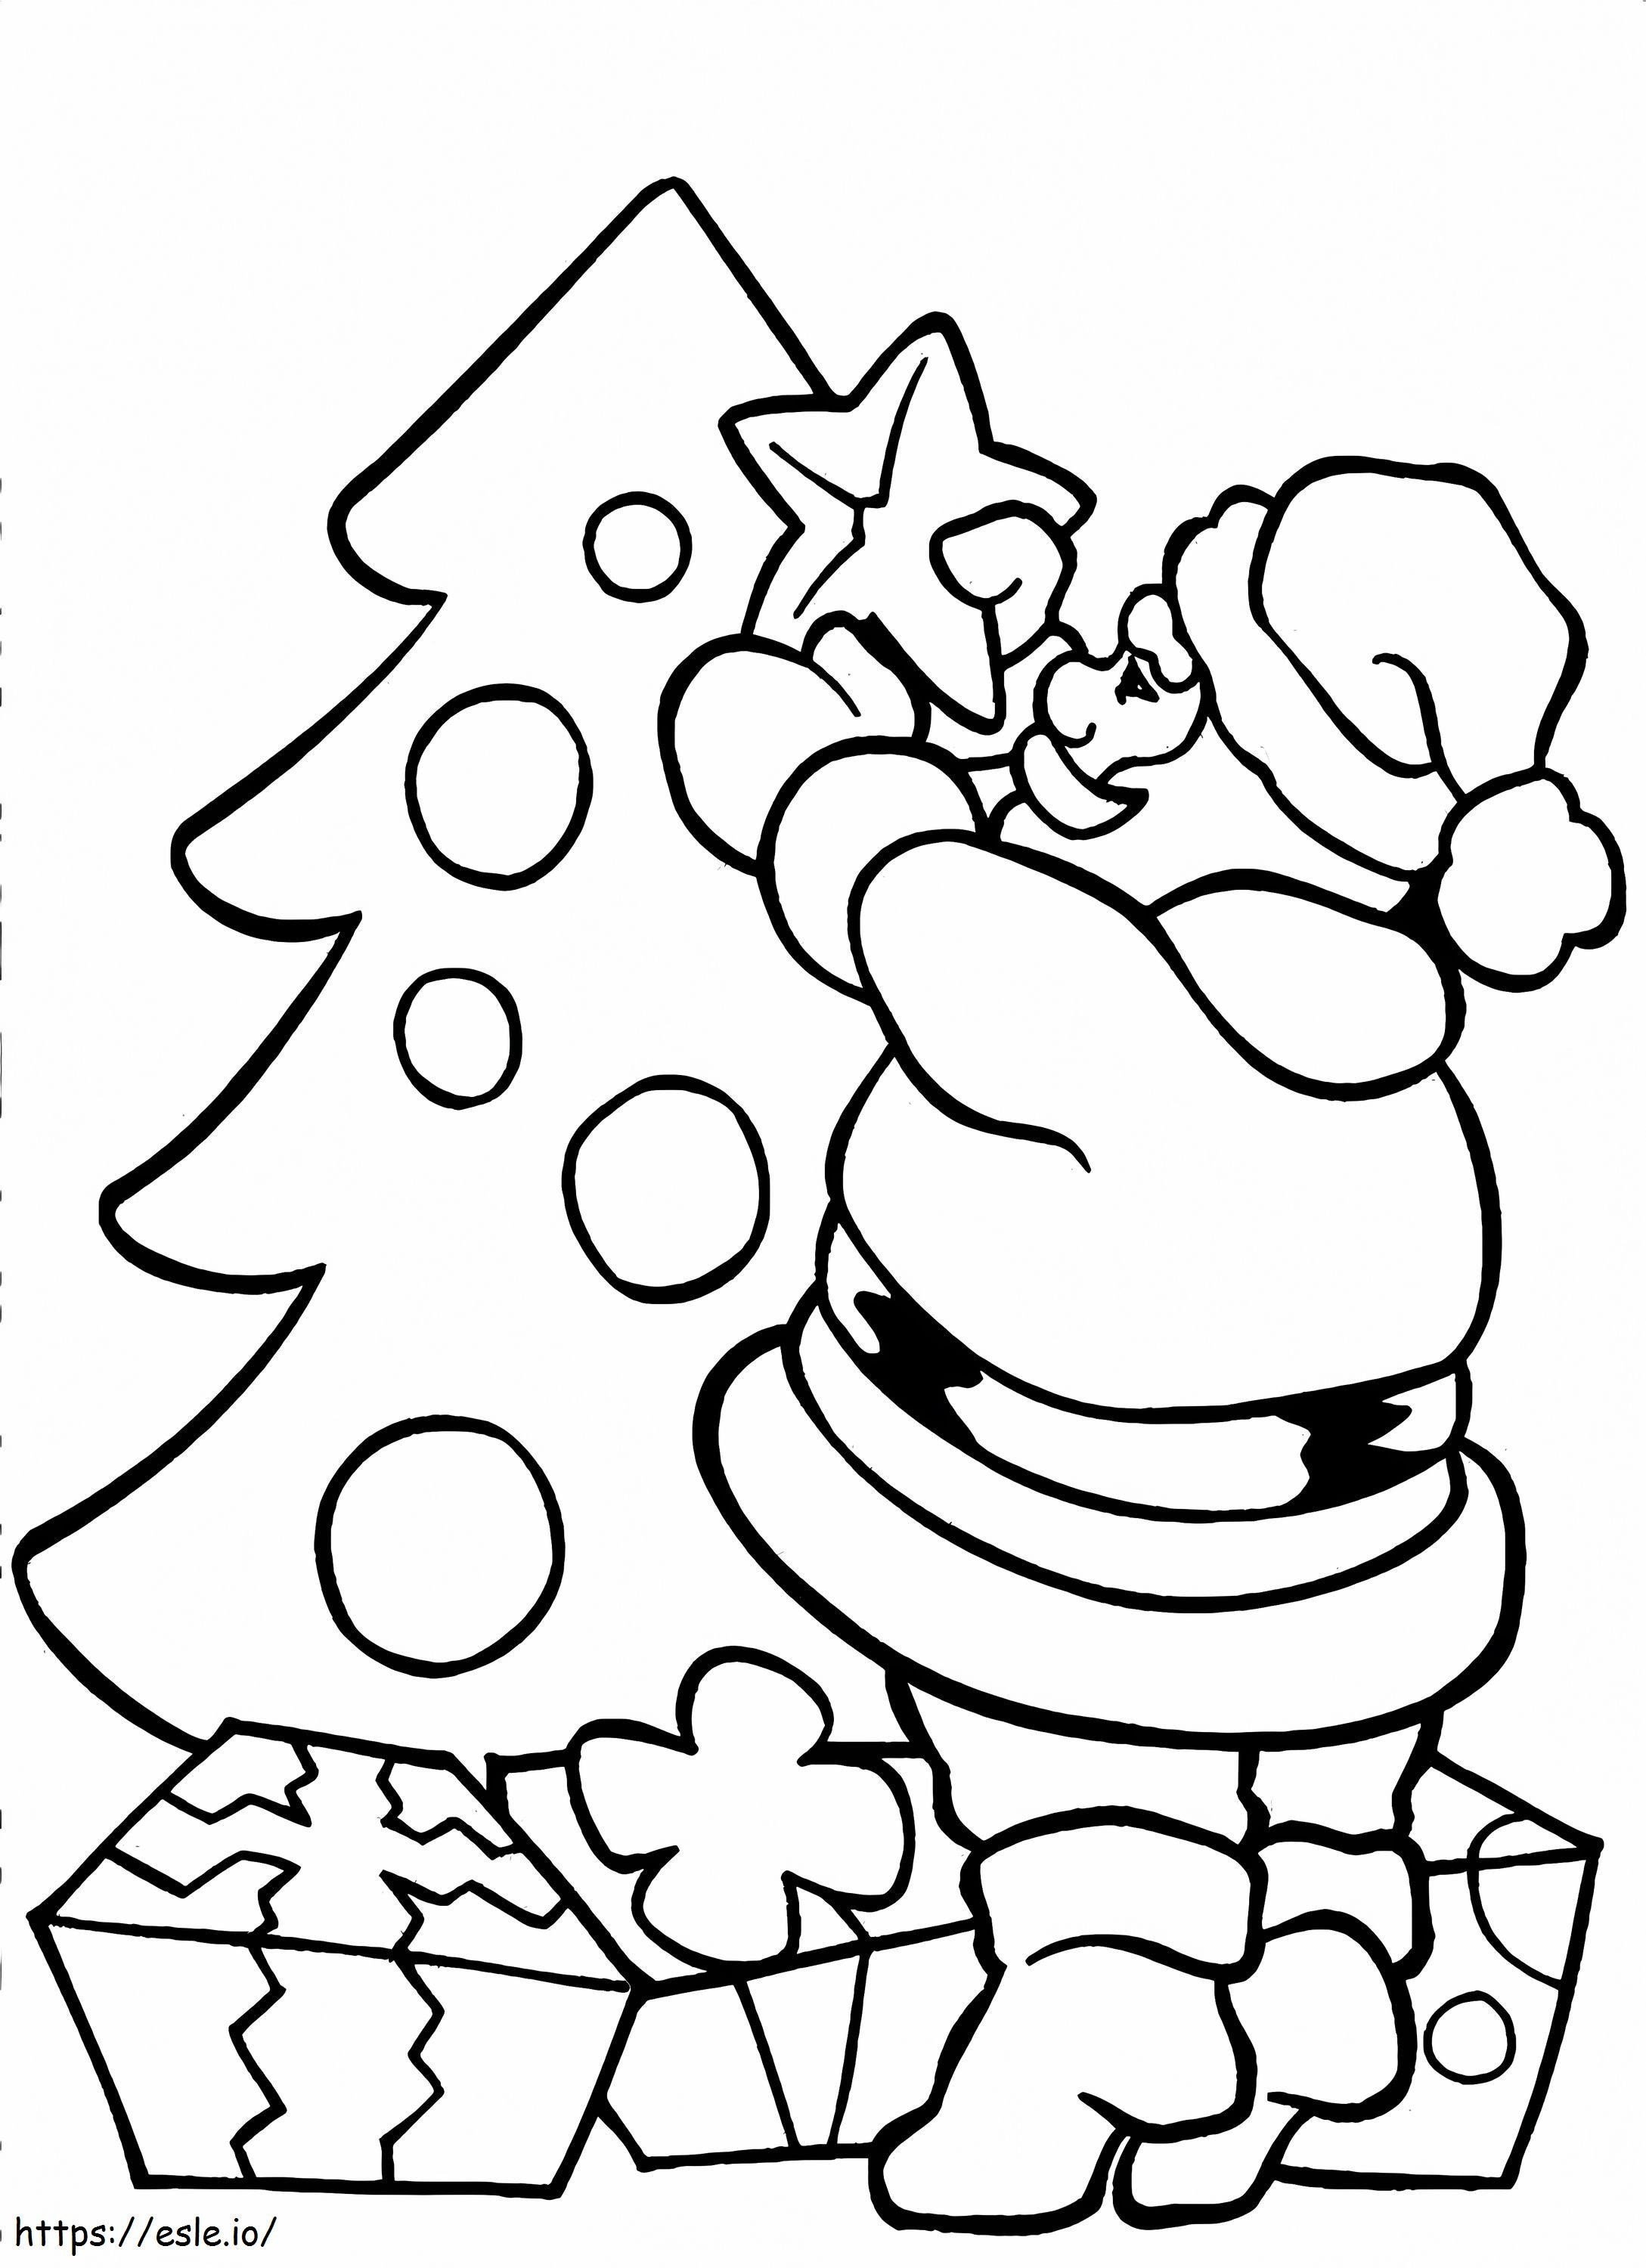 1544254790 Strong Santa Claus Printables Printable Carbon Materialwitness Co coloring page